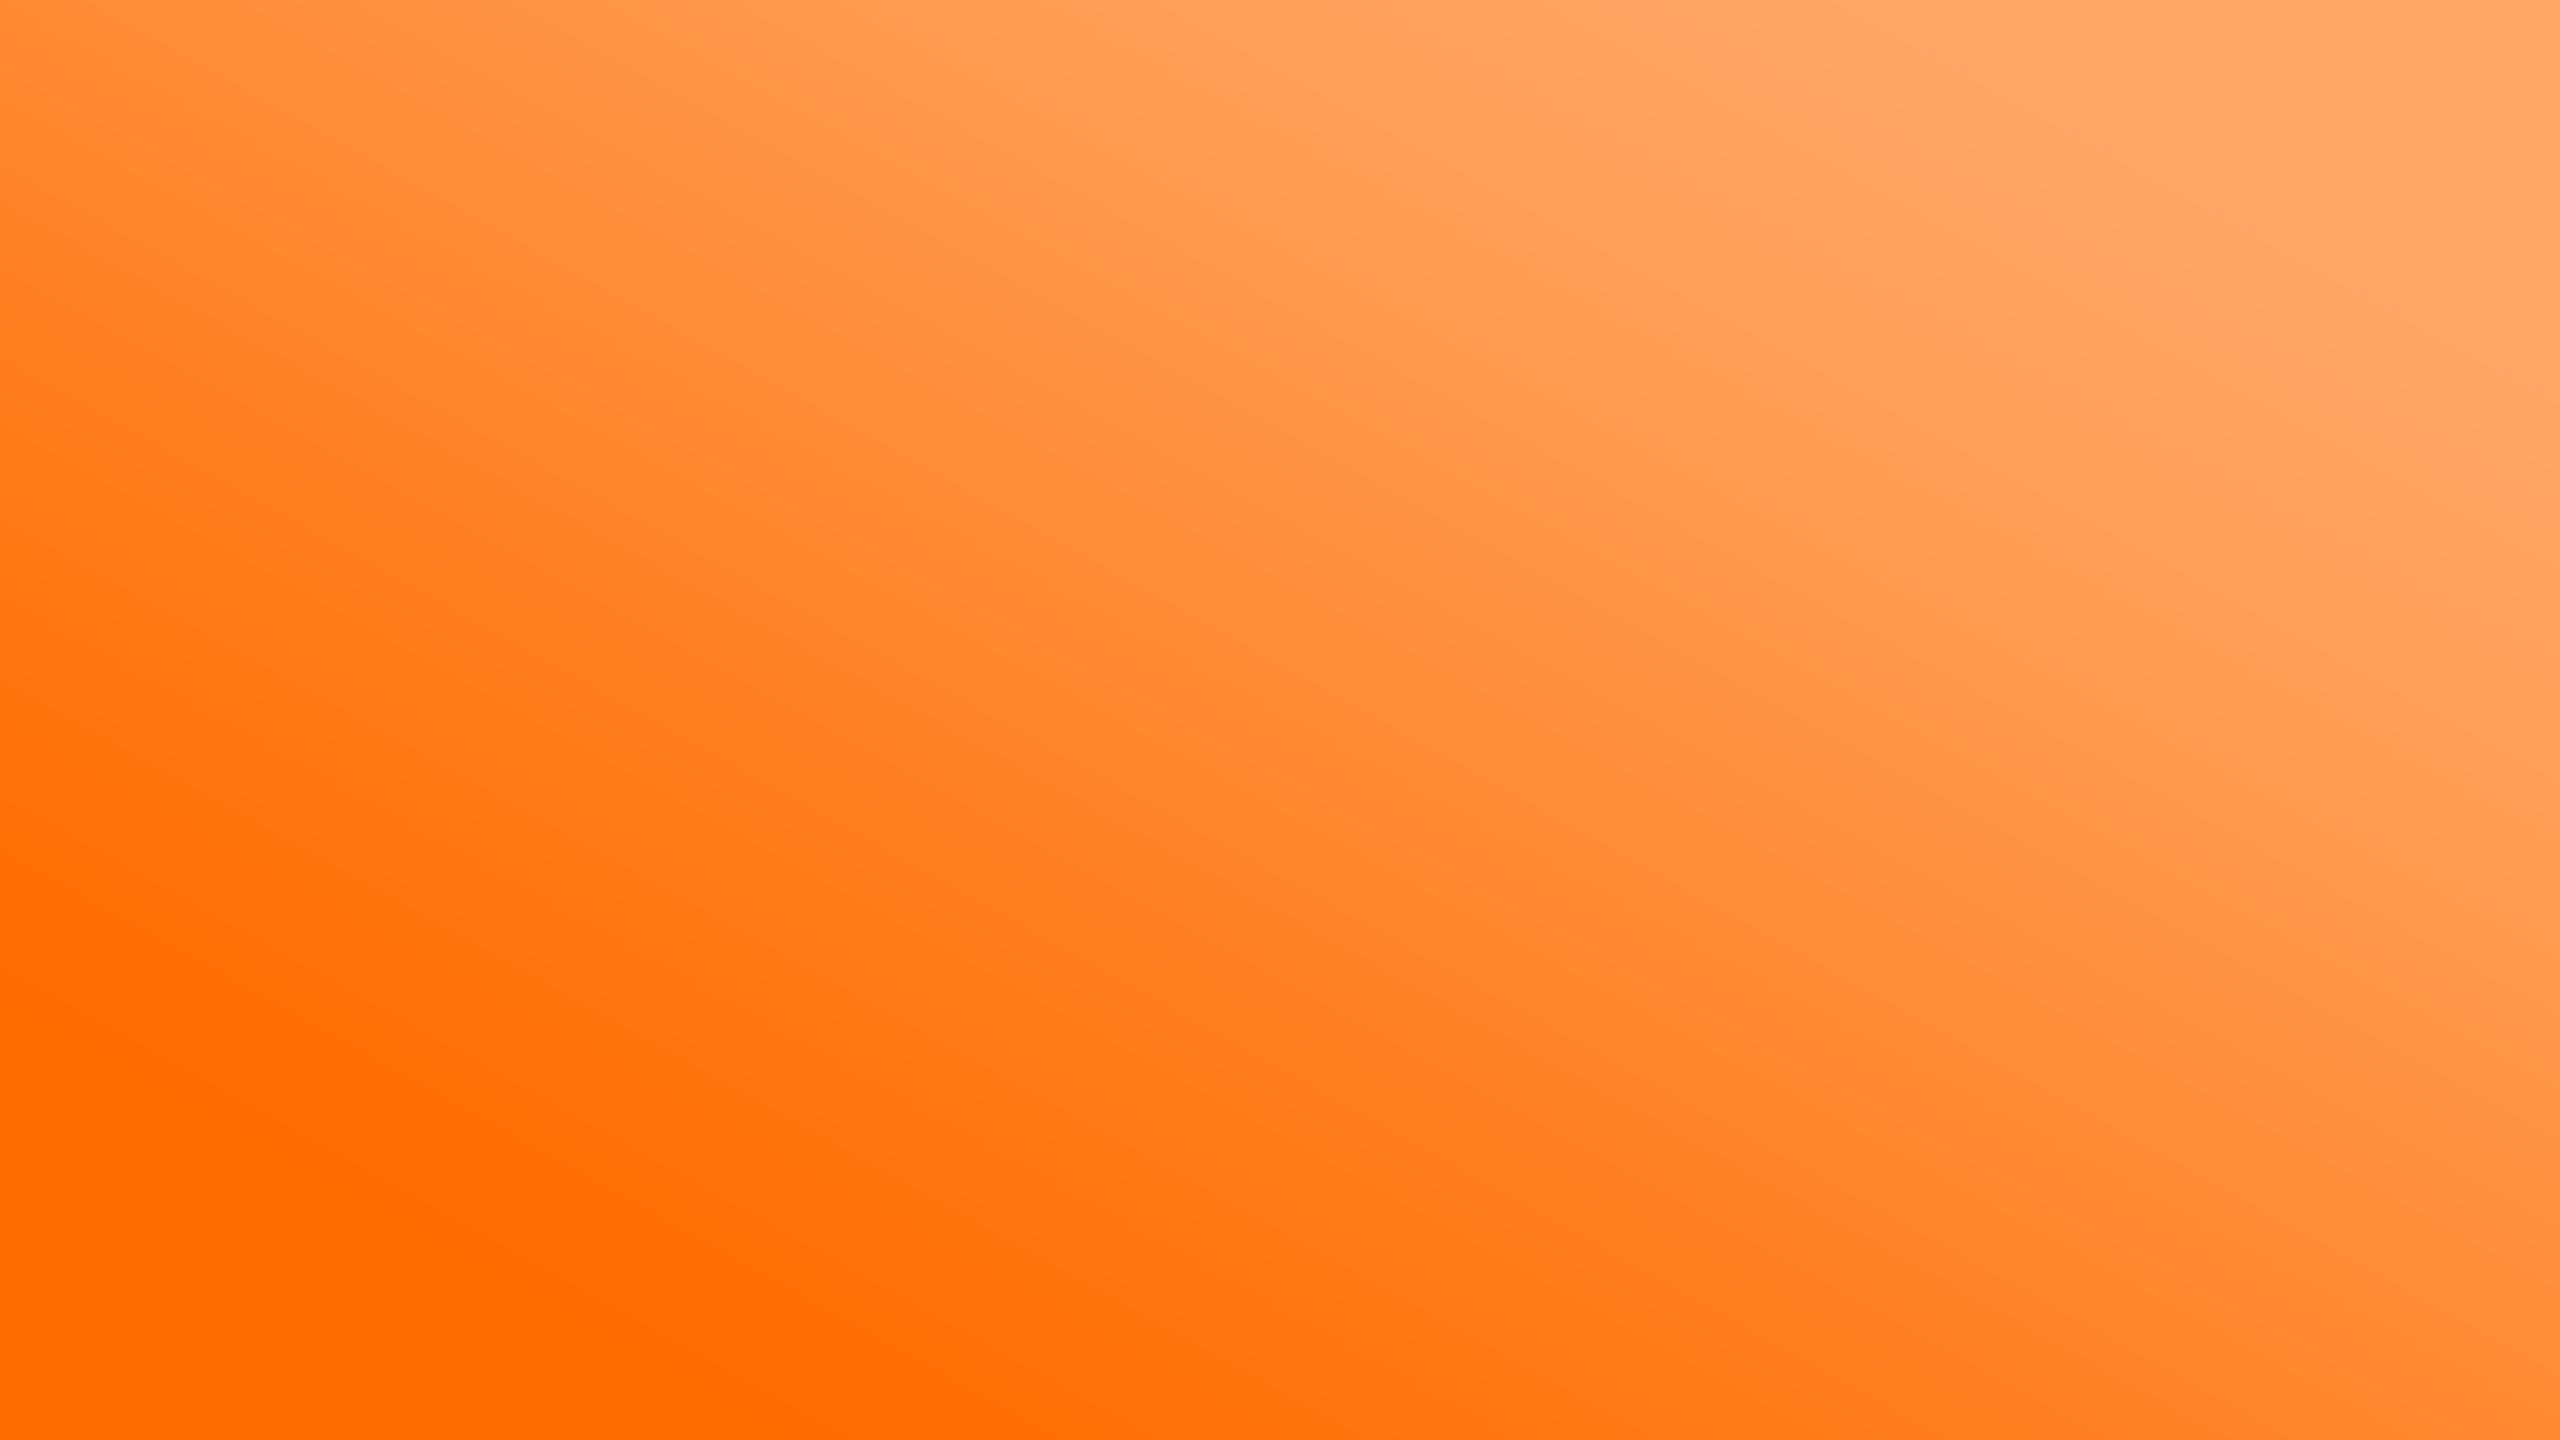 Download wallpaper 2560x1440 orange, white, solid, colorful widescreen 16:9 HD background